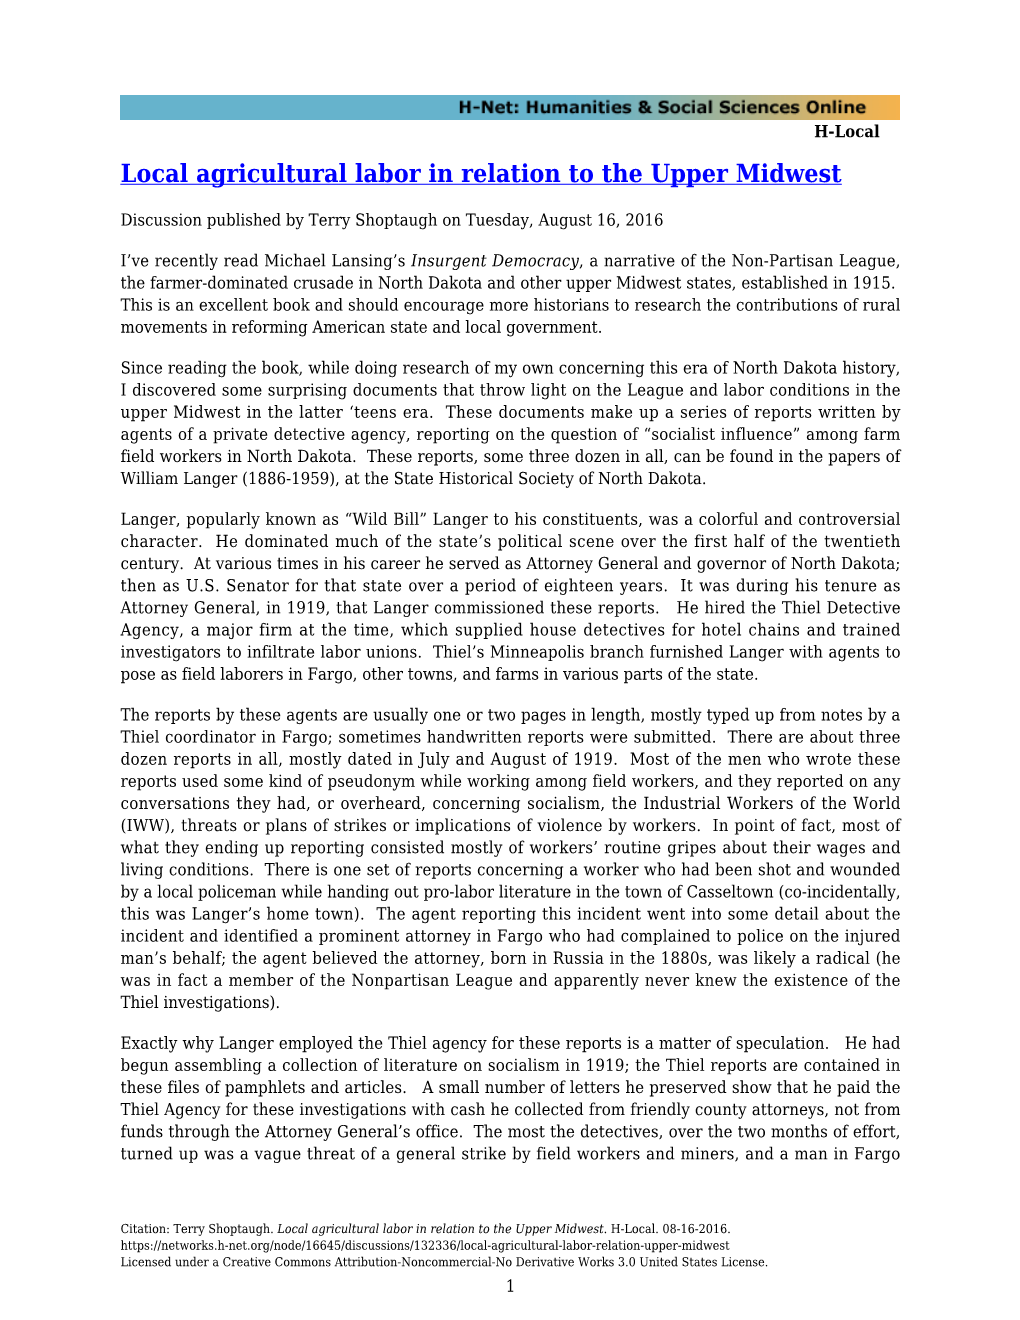 Local Agricultural Labor in Relation to the Upper Midwest